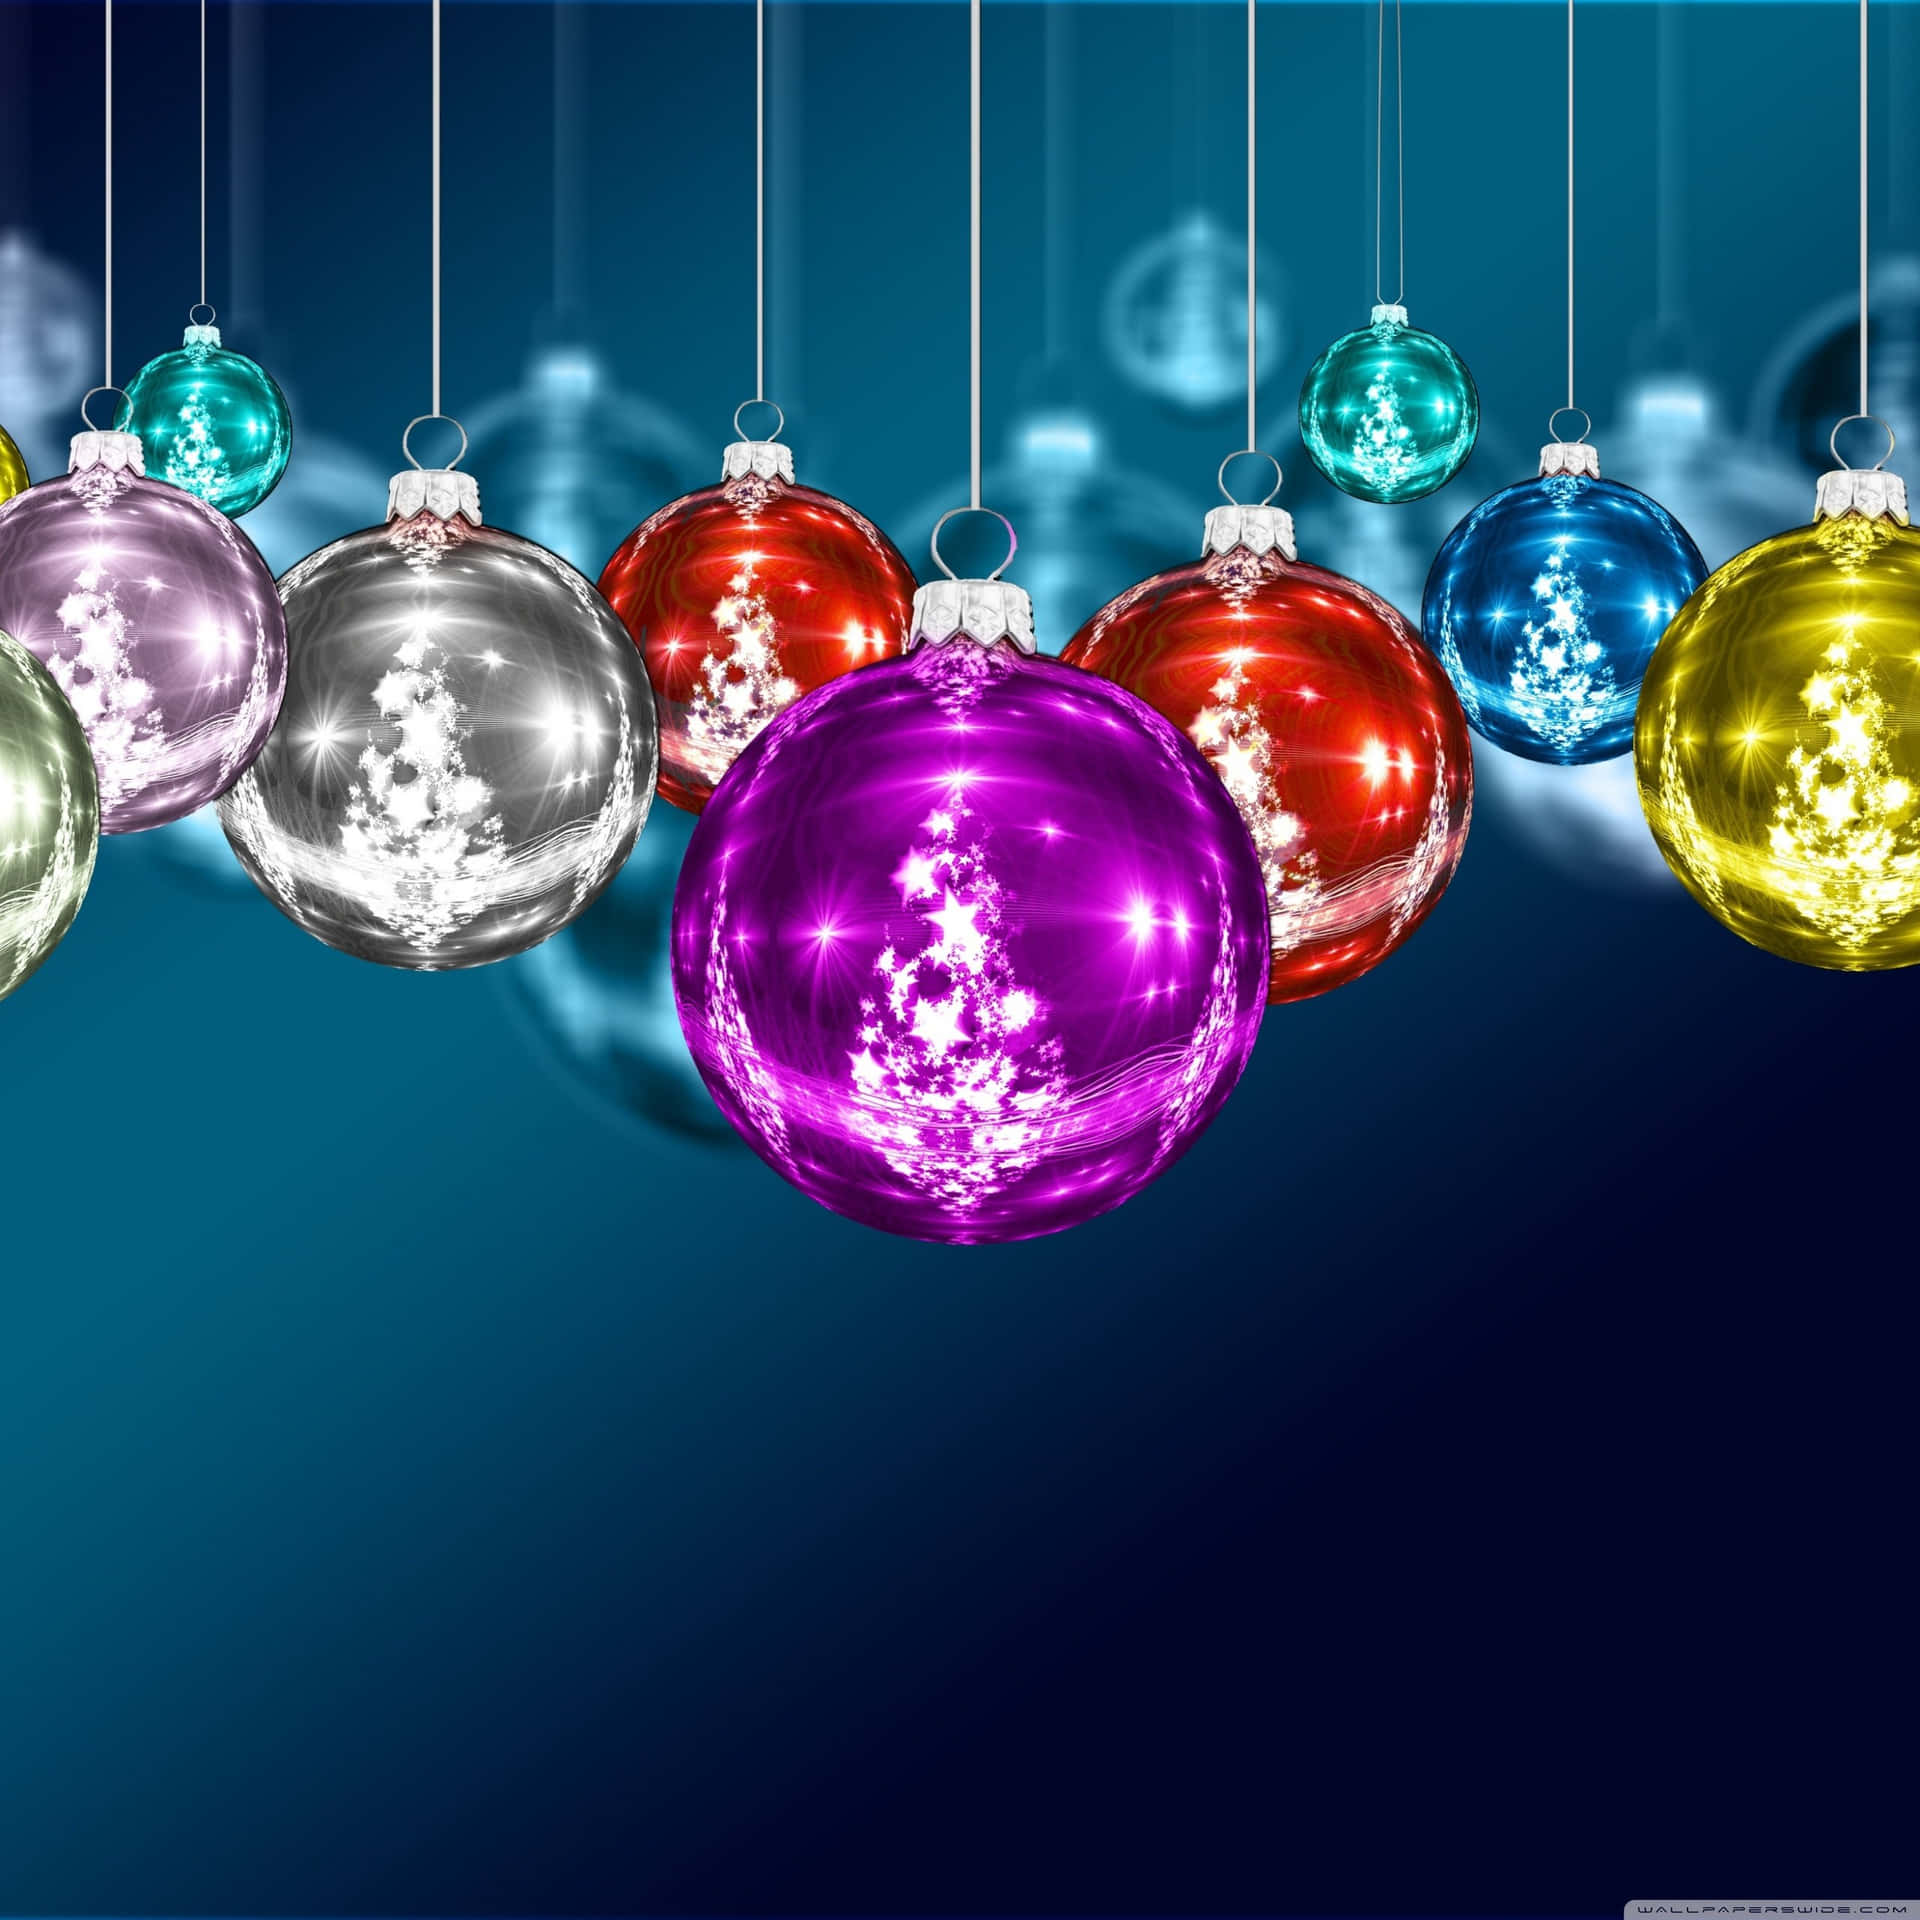 Christmas Ornaments Hanging From Strings On A Blue Background Wallpaper